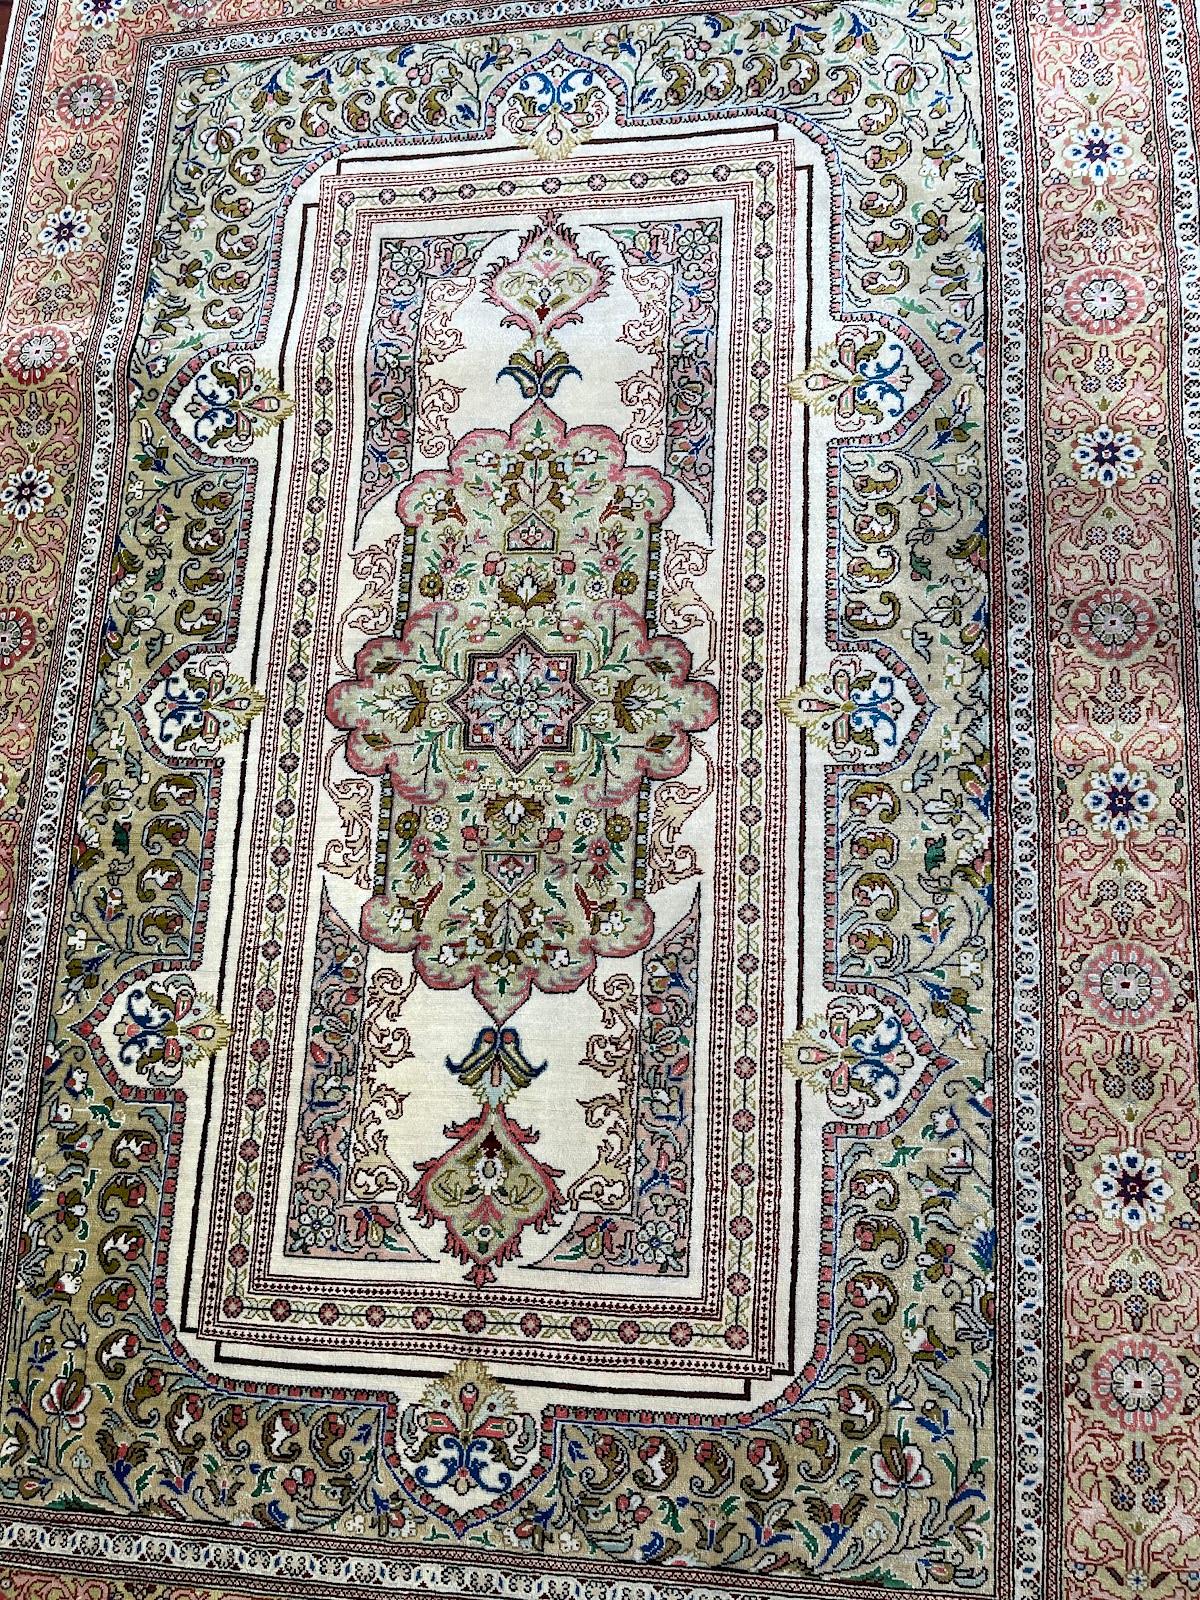 Extremely Fine Persian Silk Qum Rug/Carpet In Excellent Condition For Sale In Gainesville, VA